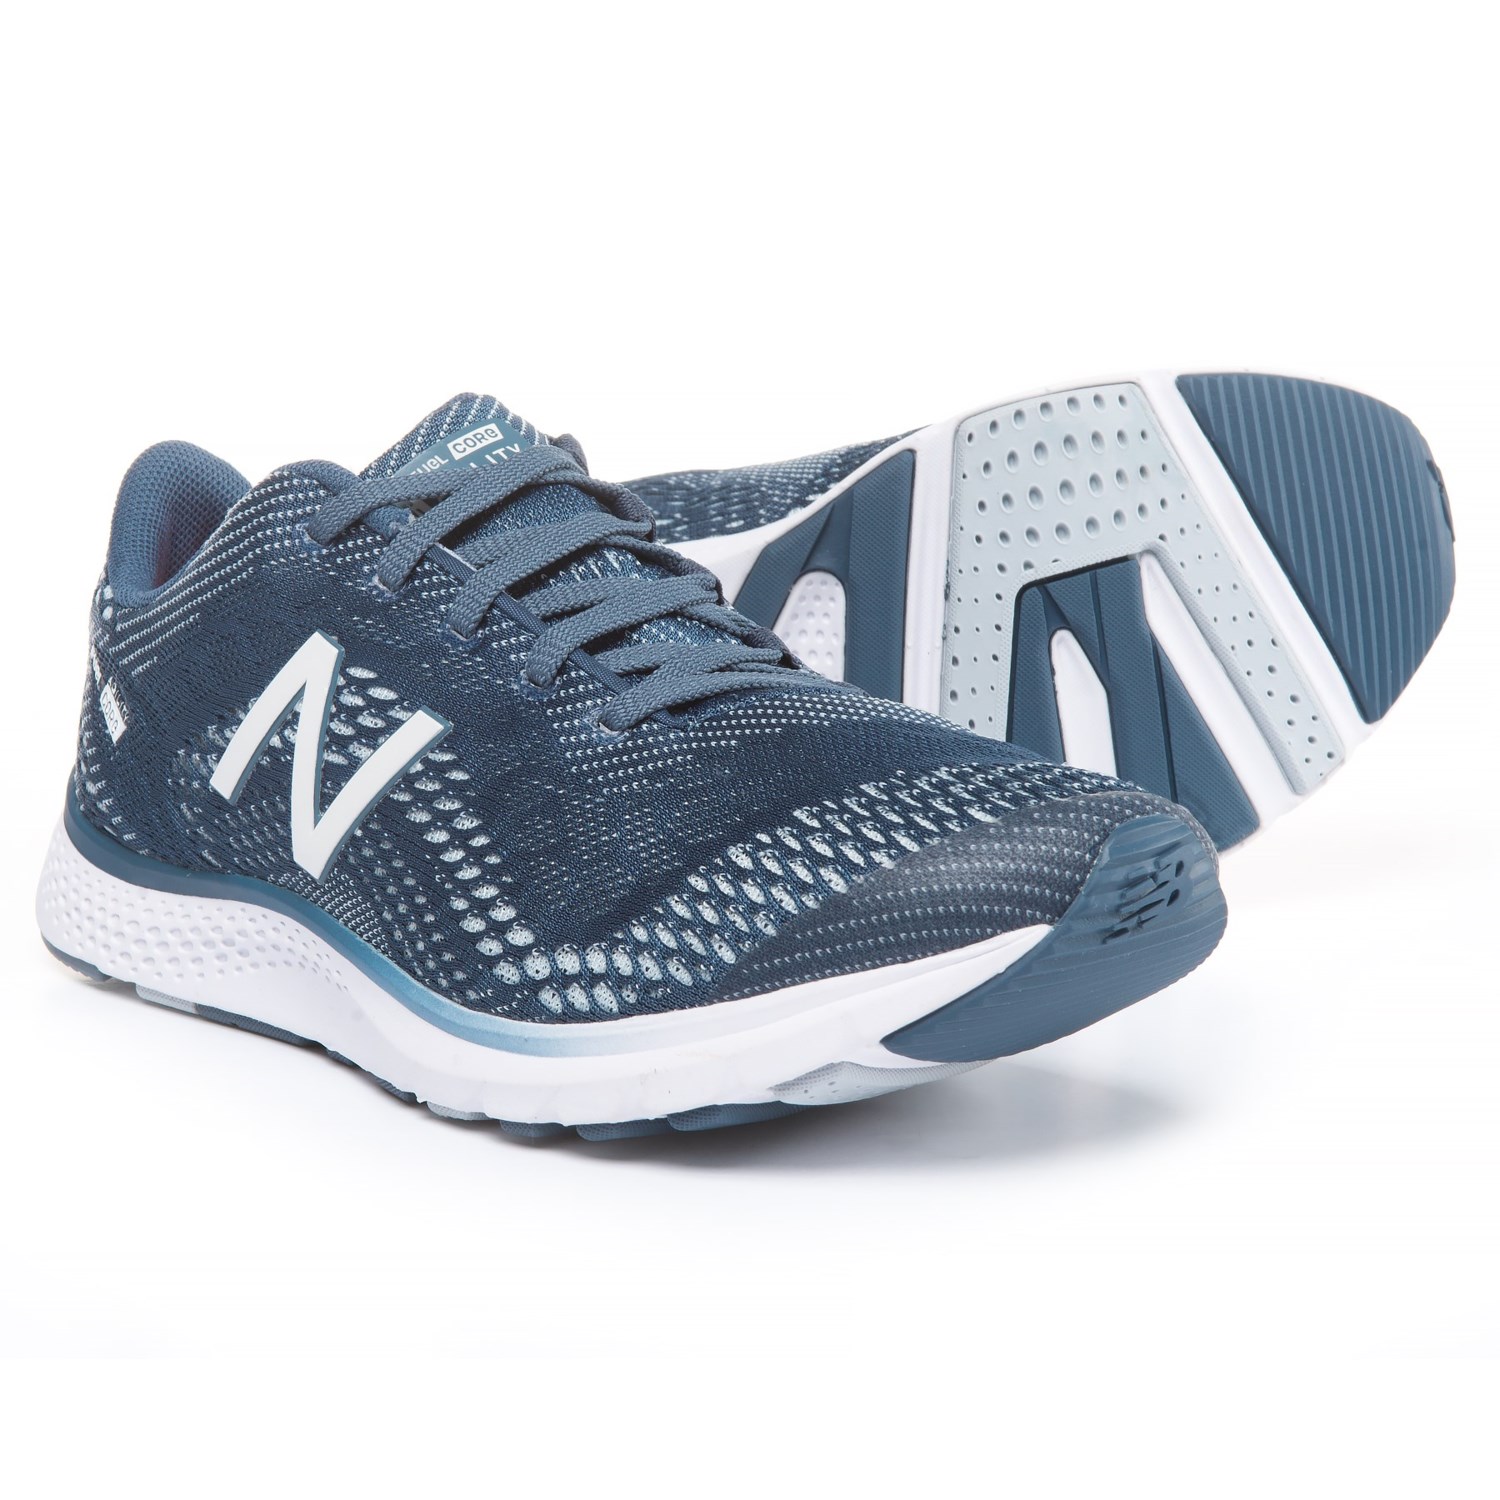 New Balance FuelCore Agility V2 Training Shoes (For Women) in Vintage  Indigo/Light